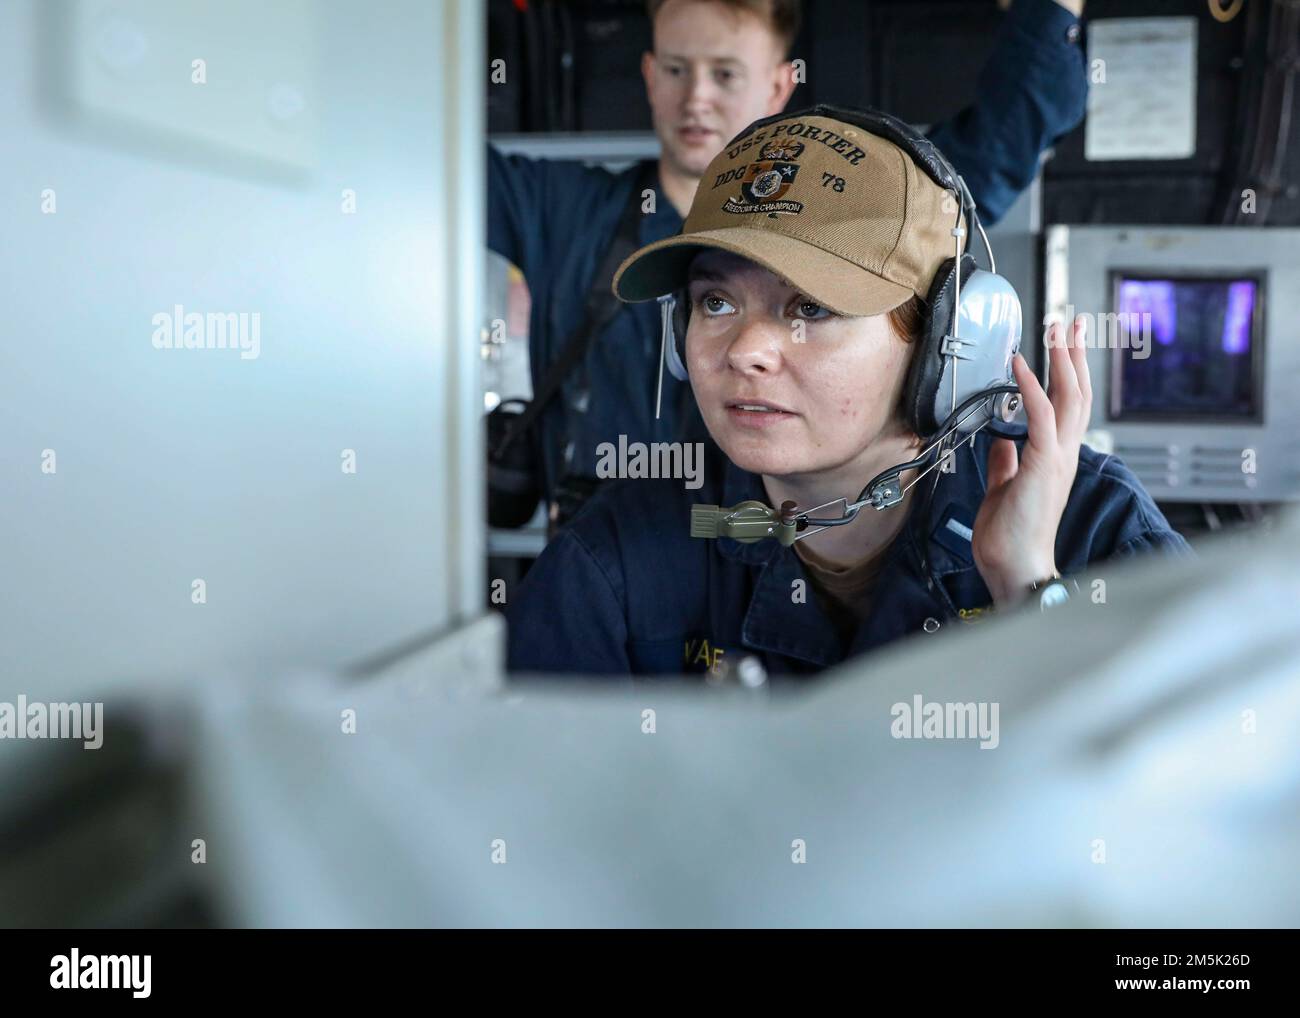 ATLANTIC OCEAN (March 21, 2022) – Lt. j.g. Stephanie Vause mans a surface radar console in the pilot house of the Arleigh Burke-class guided-missile destroyer USS Porter (DDG 78), March 21. Porter, forward-deployed to Rota, Spain, is currently participating in Task Force Exercise in the U.S. 2nd Fleet area of operations. TFEX serves as the certification exercise for independent deploying ships and is designed to test mission readiness and performance in integrated operations. Stock Photo